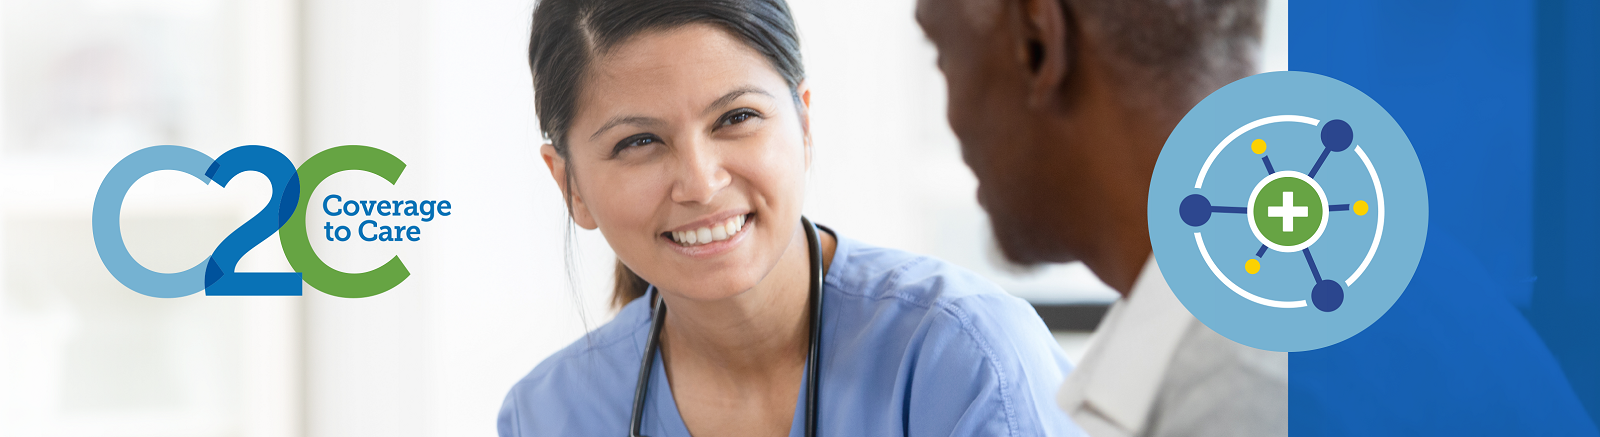 Nurse with stethoscope draped around her neck smiling at a patient